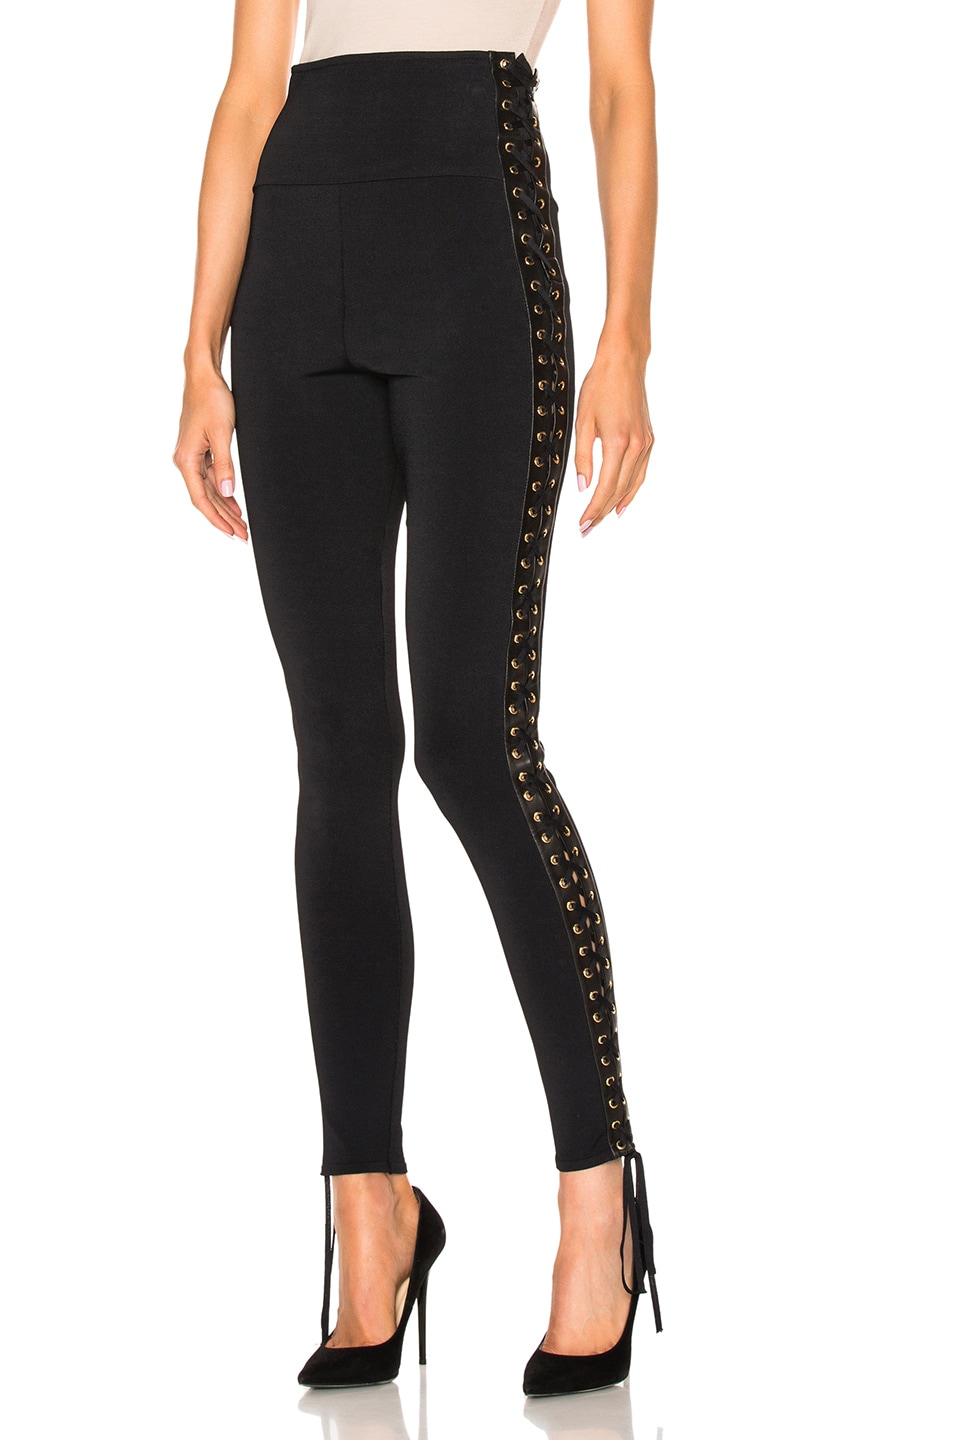 Image 1 of Alexandre Vauthier Lace Up Side Knit Pants in Black